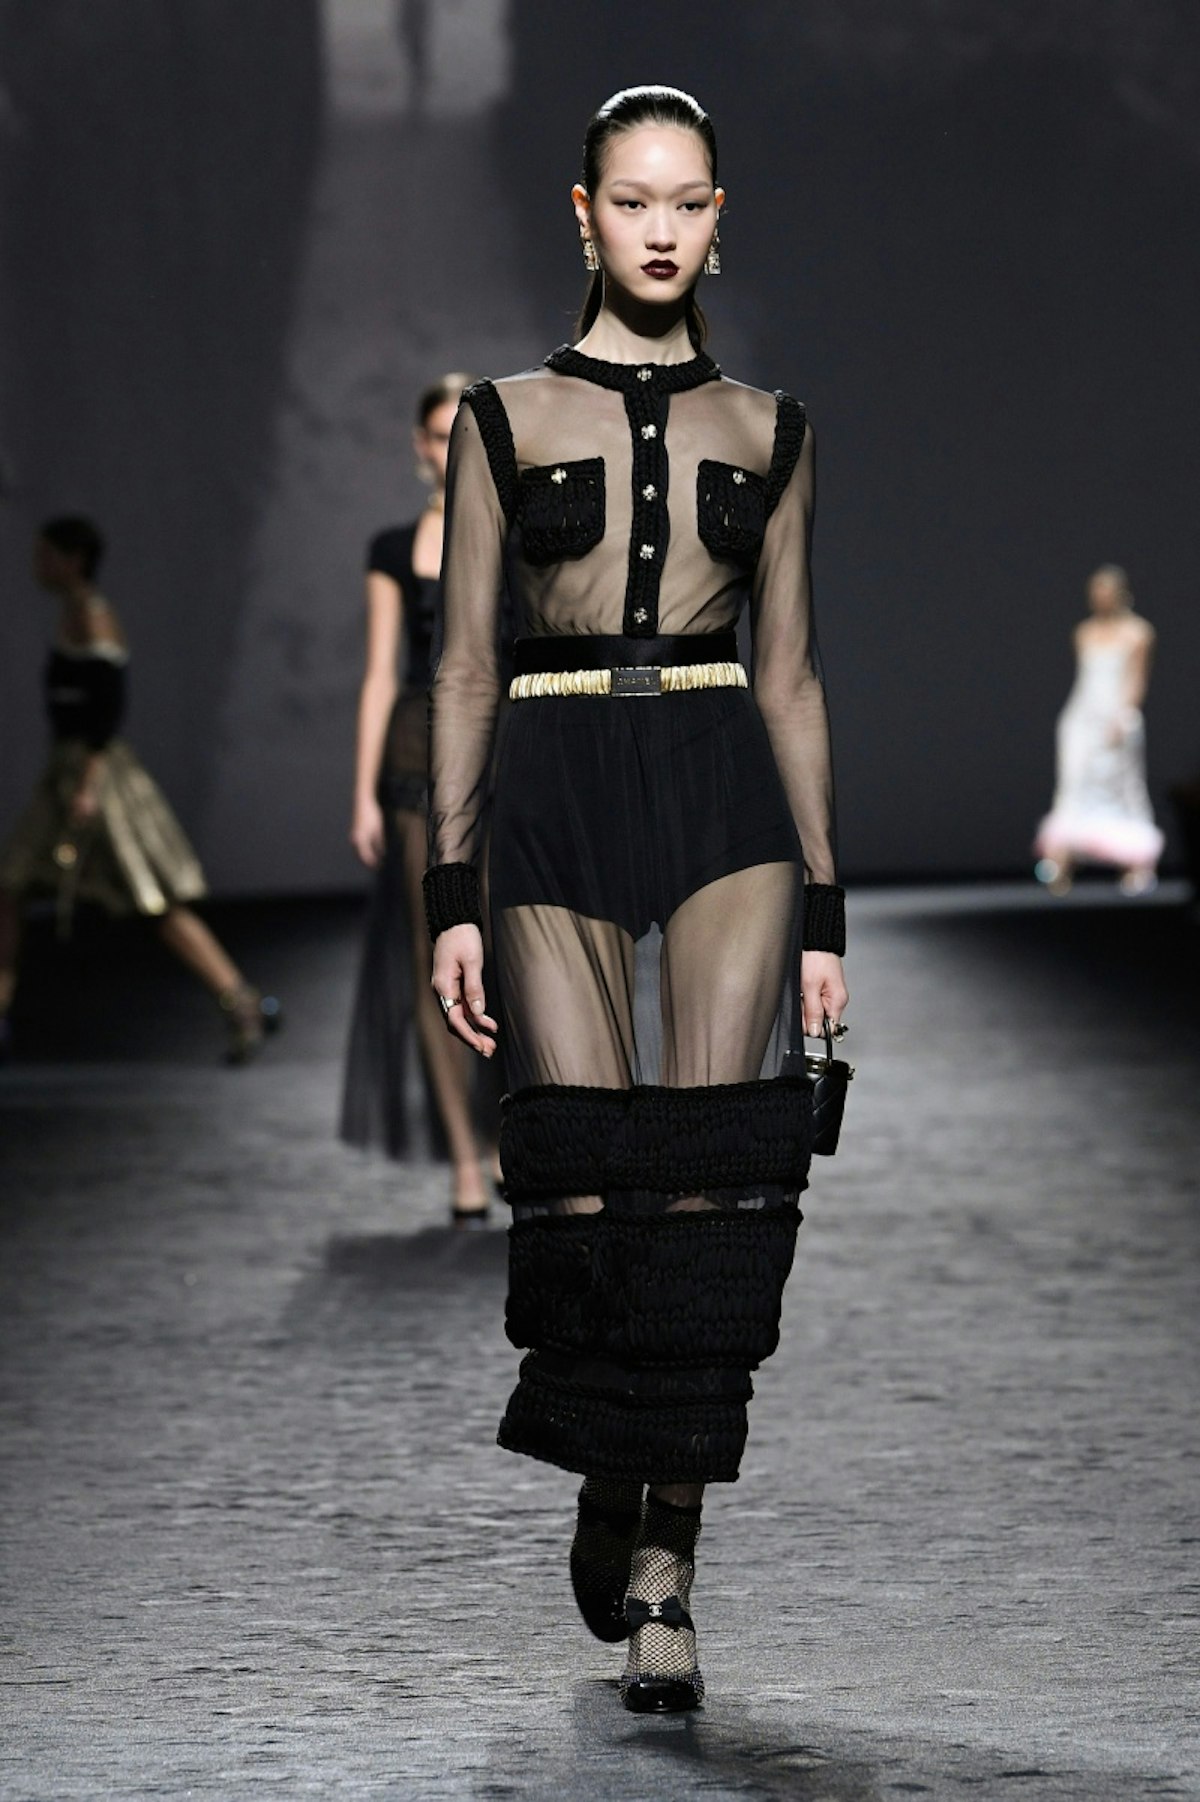 The Sheer Dress Trend Essential for Spring 2023